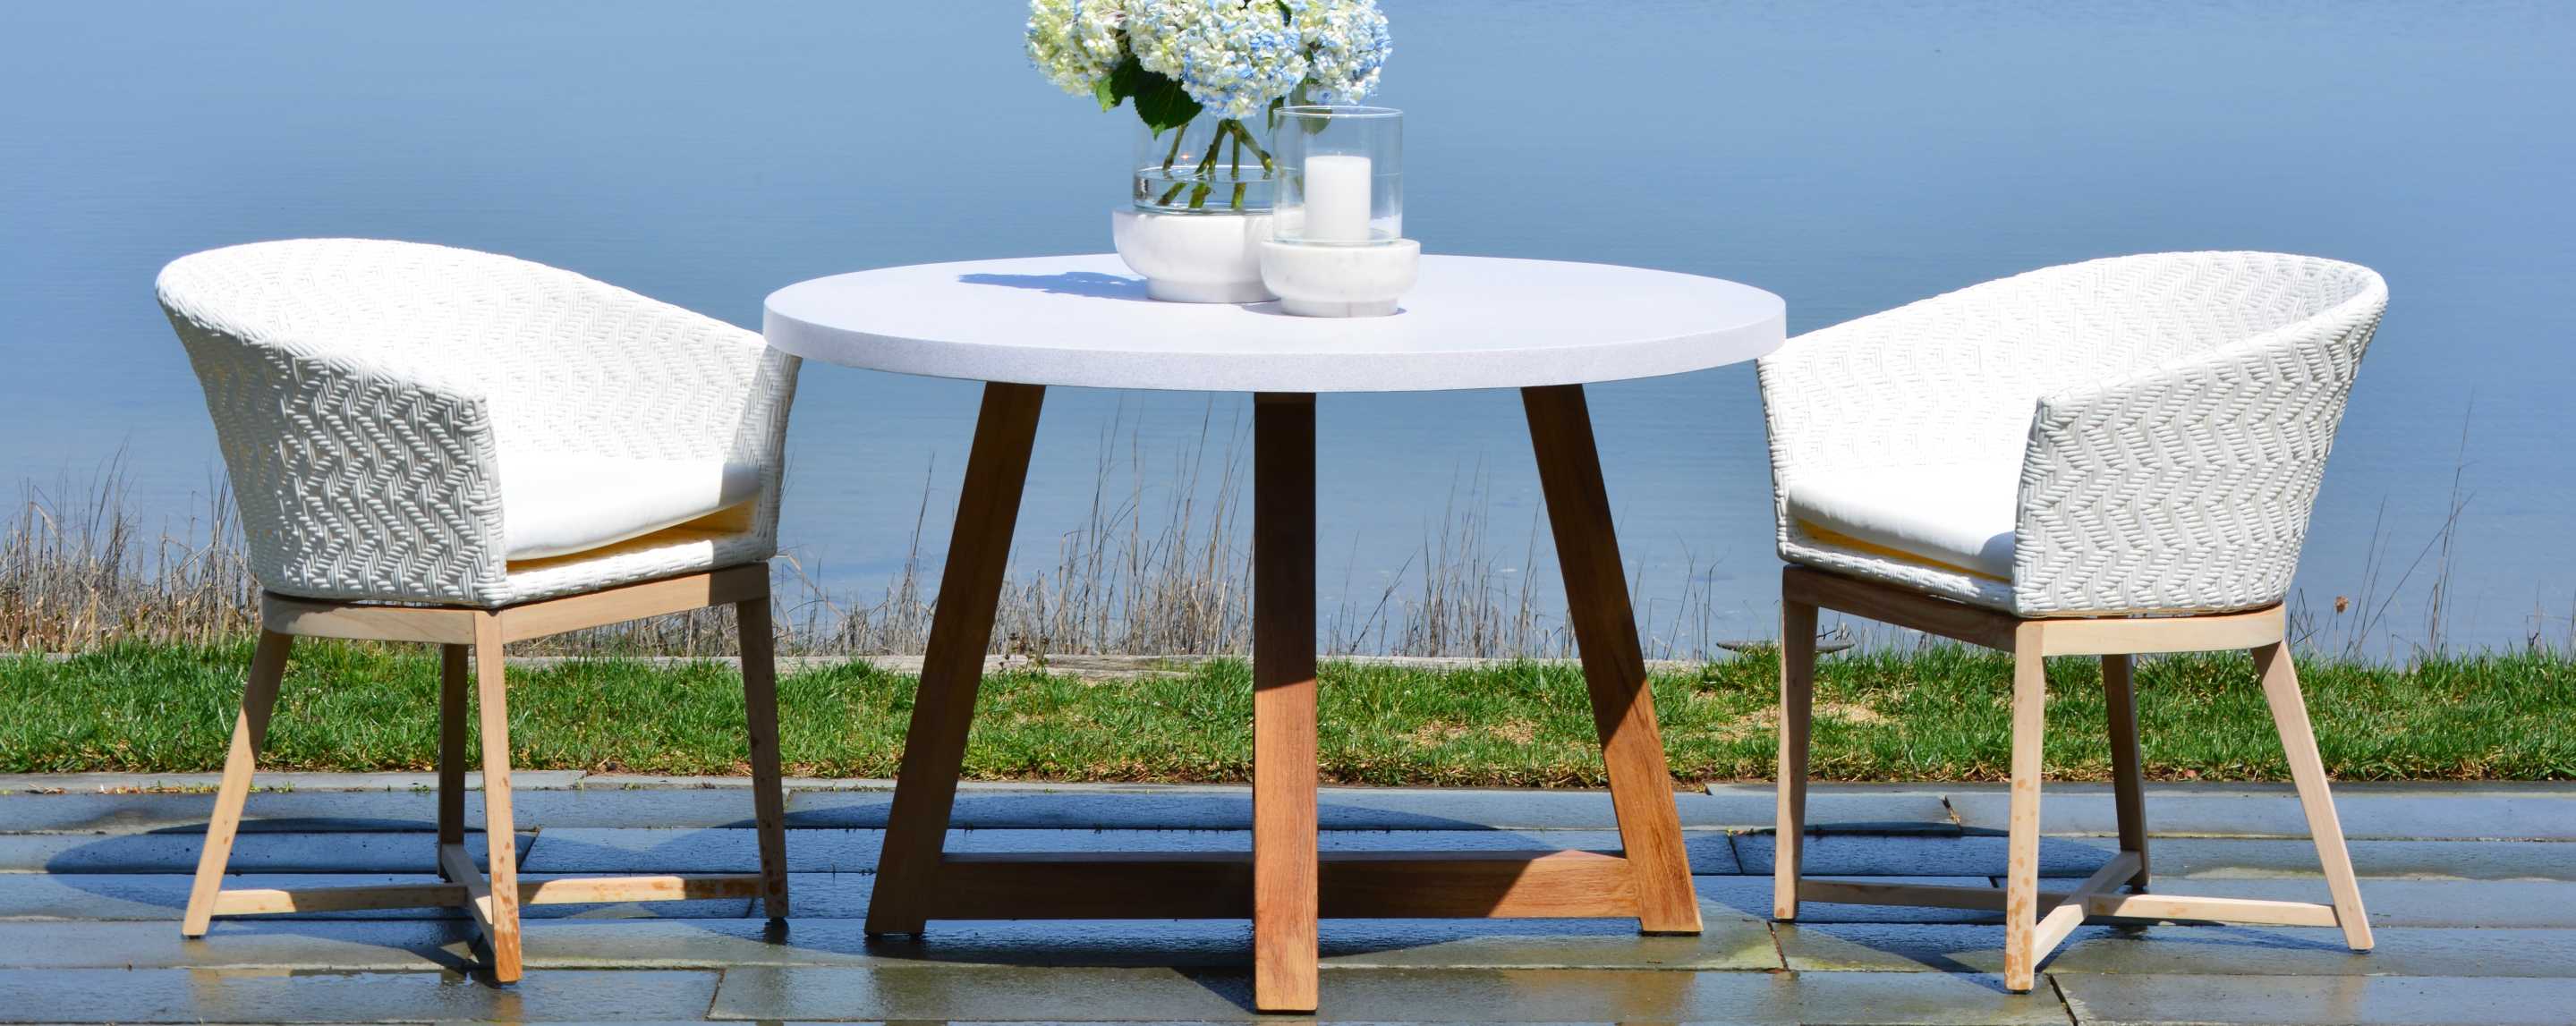 the surf club round dining table